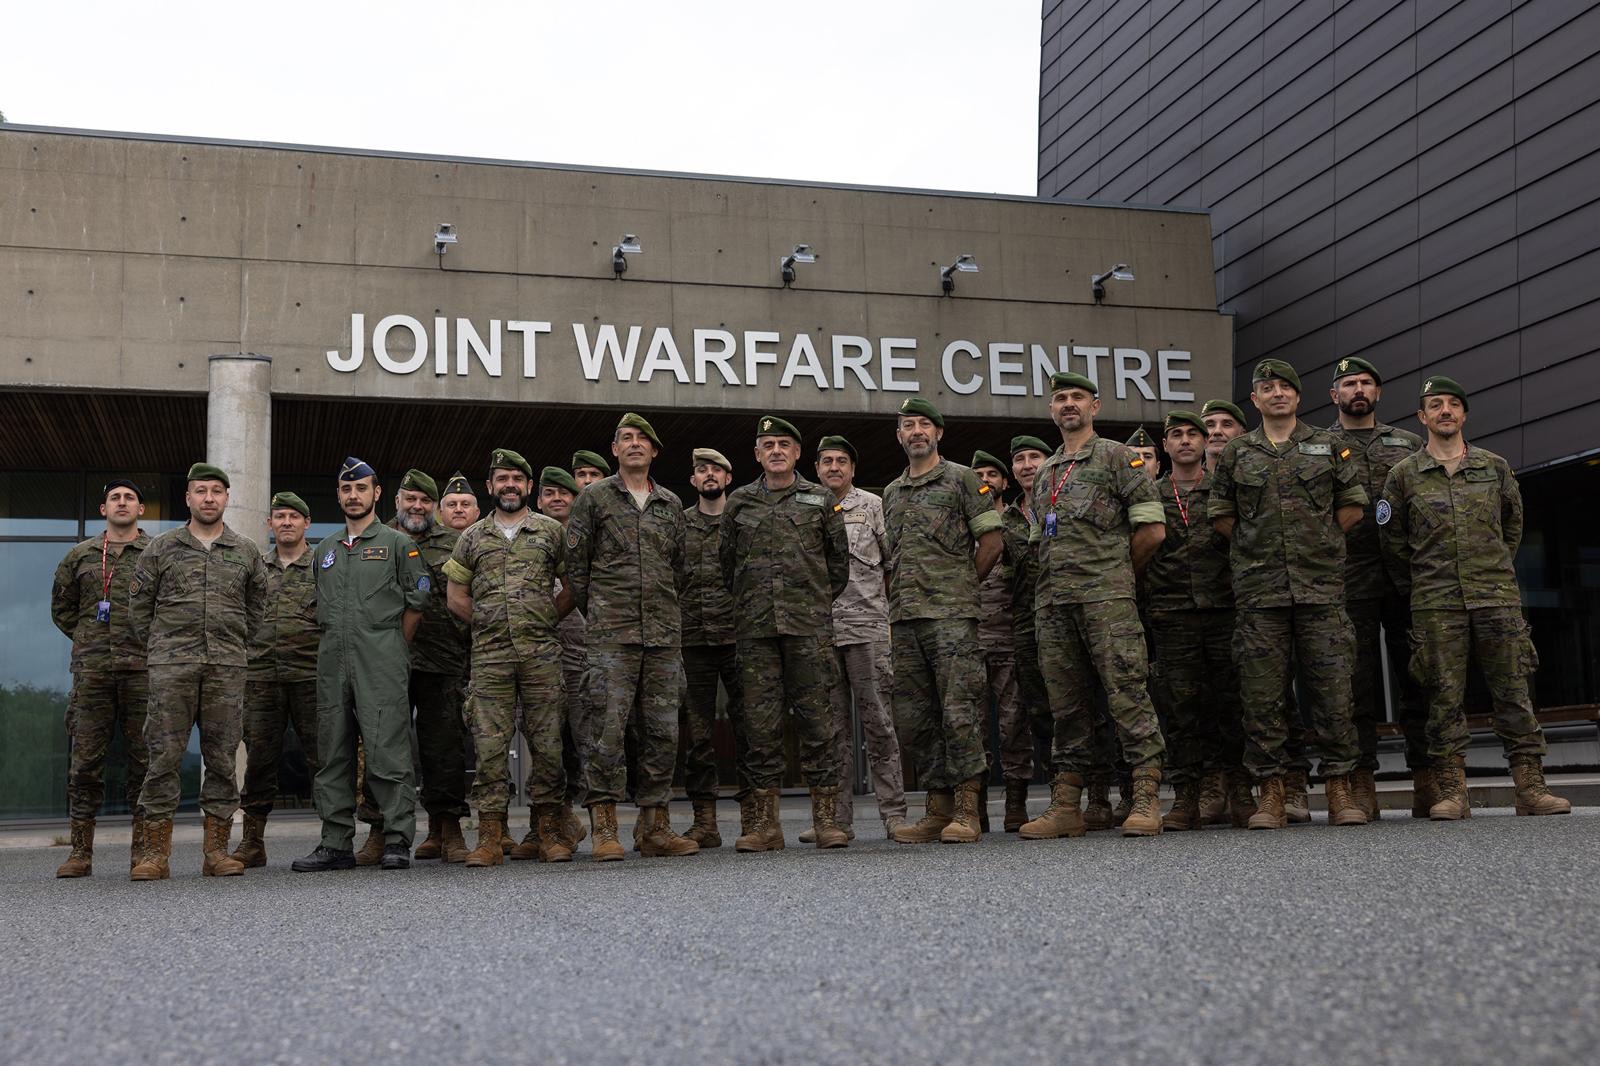 Spanish personnel at the Joint Warfare Centre